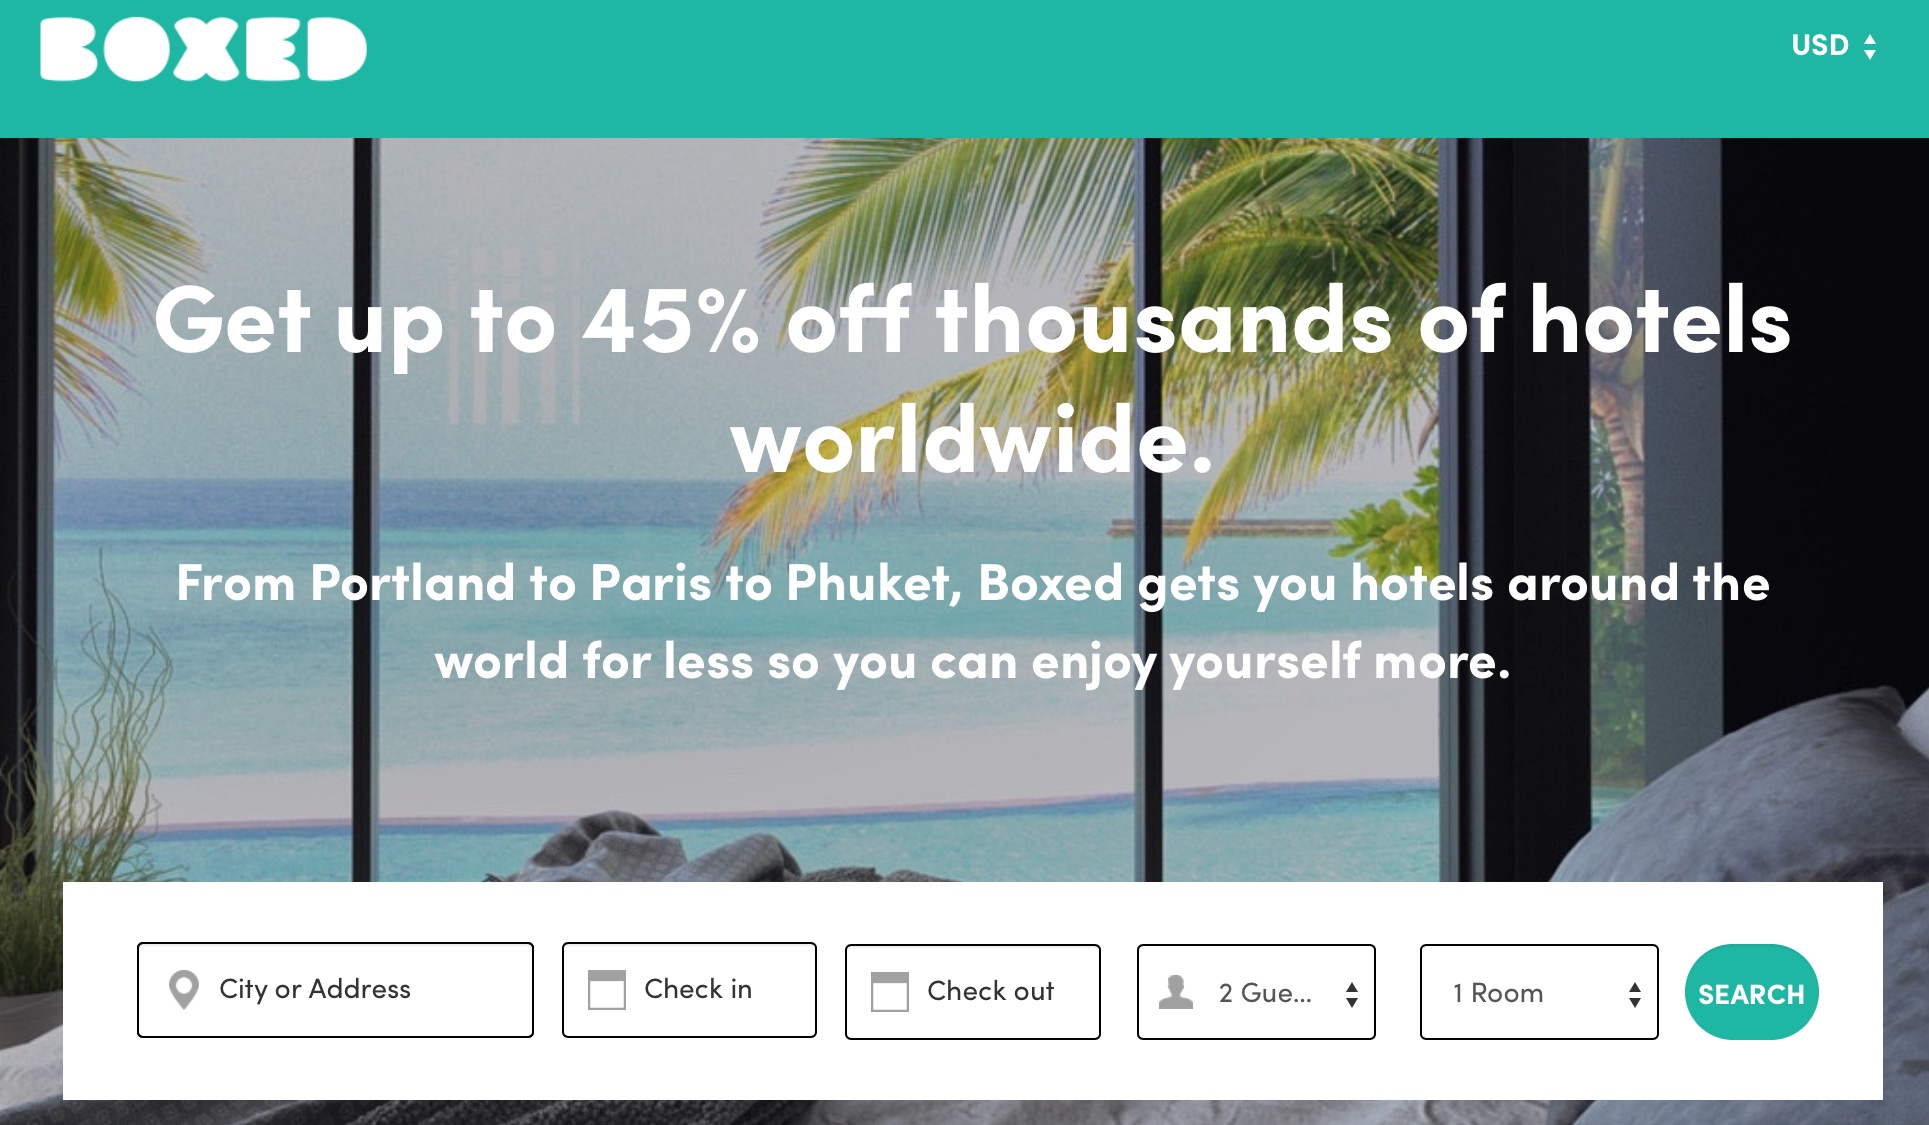 Boxed hotels: How to parlay their low rates into even more savings